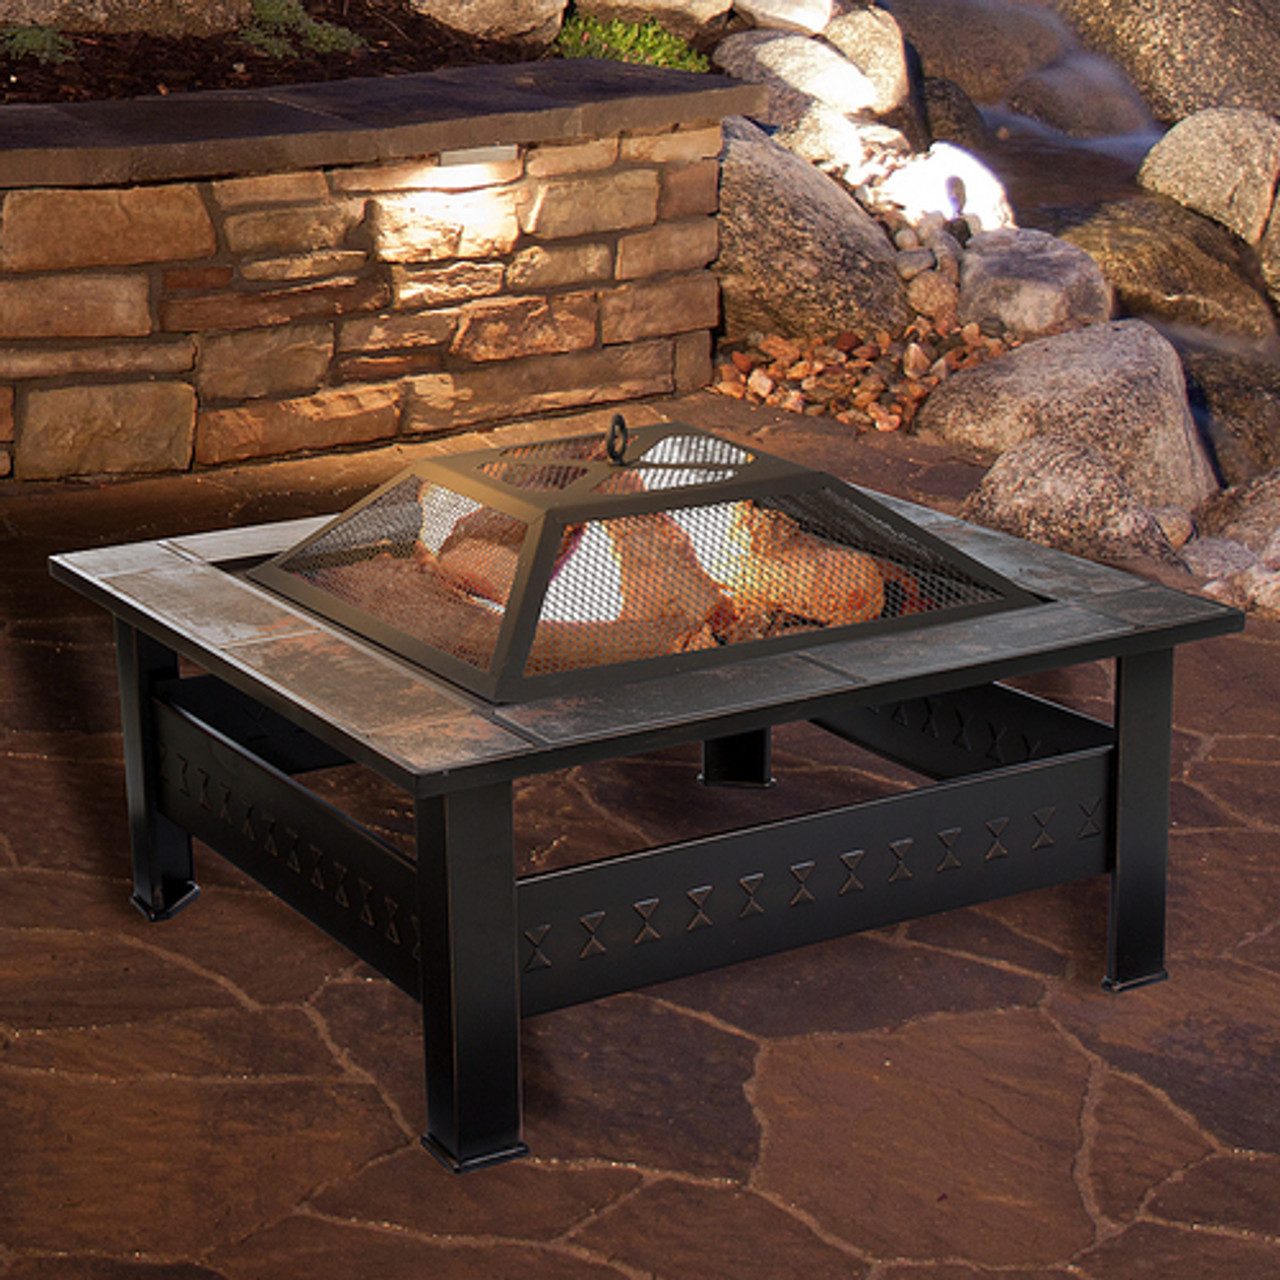 Pure Garden - Fire Pit Set, Wood Burning Pit With Spark Screen, Cover and Log Poker,  32" Marble Tile Square Firepit - Black and orange marbled